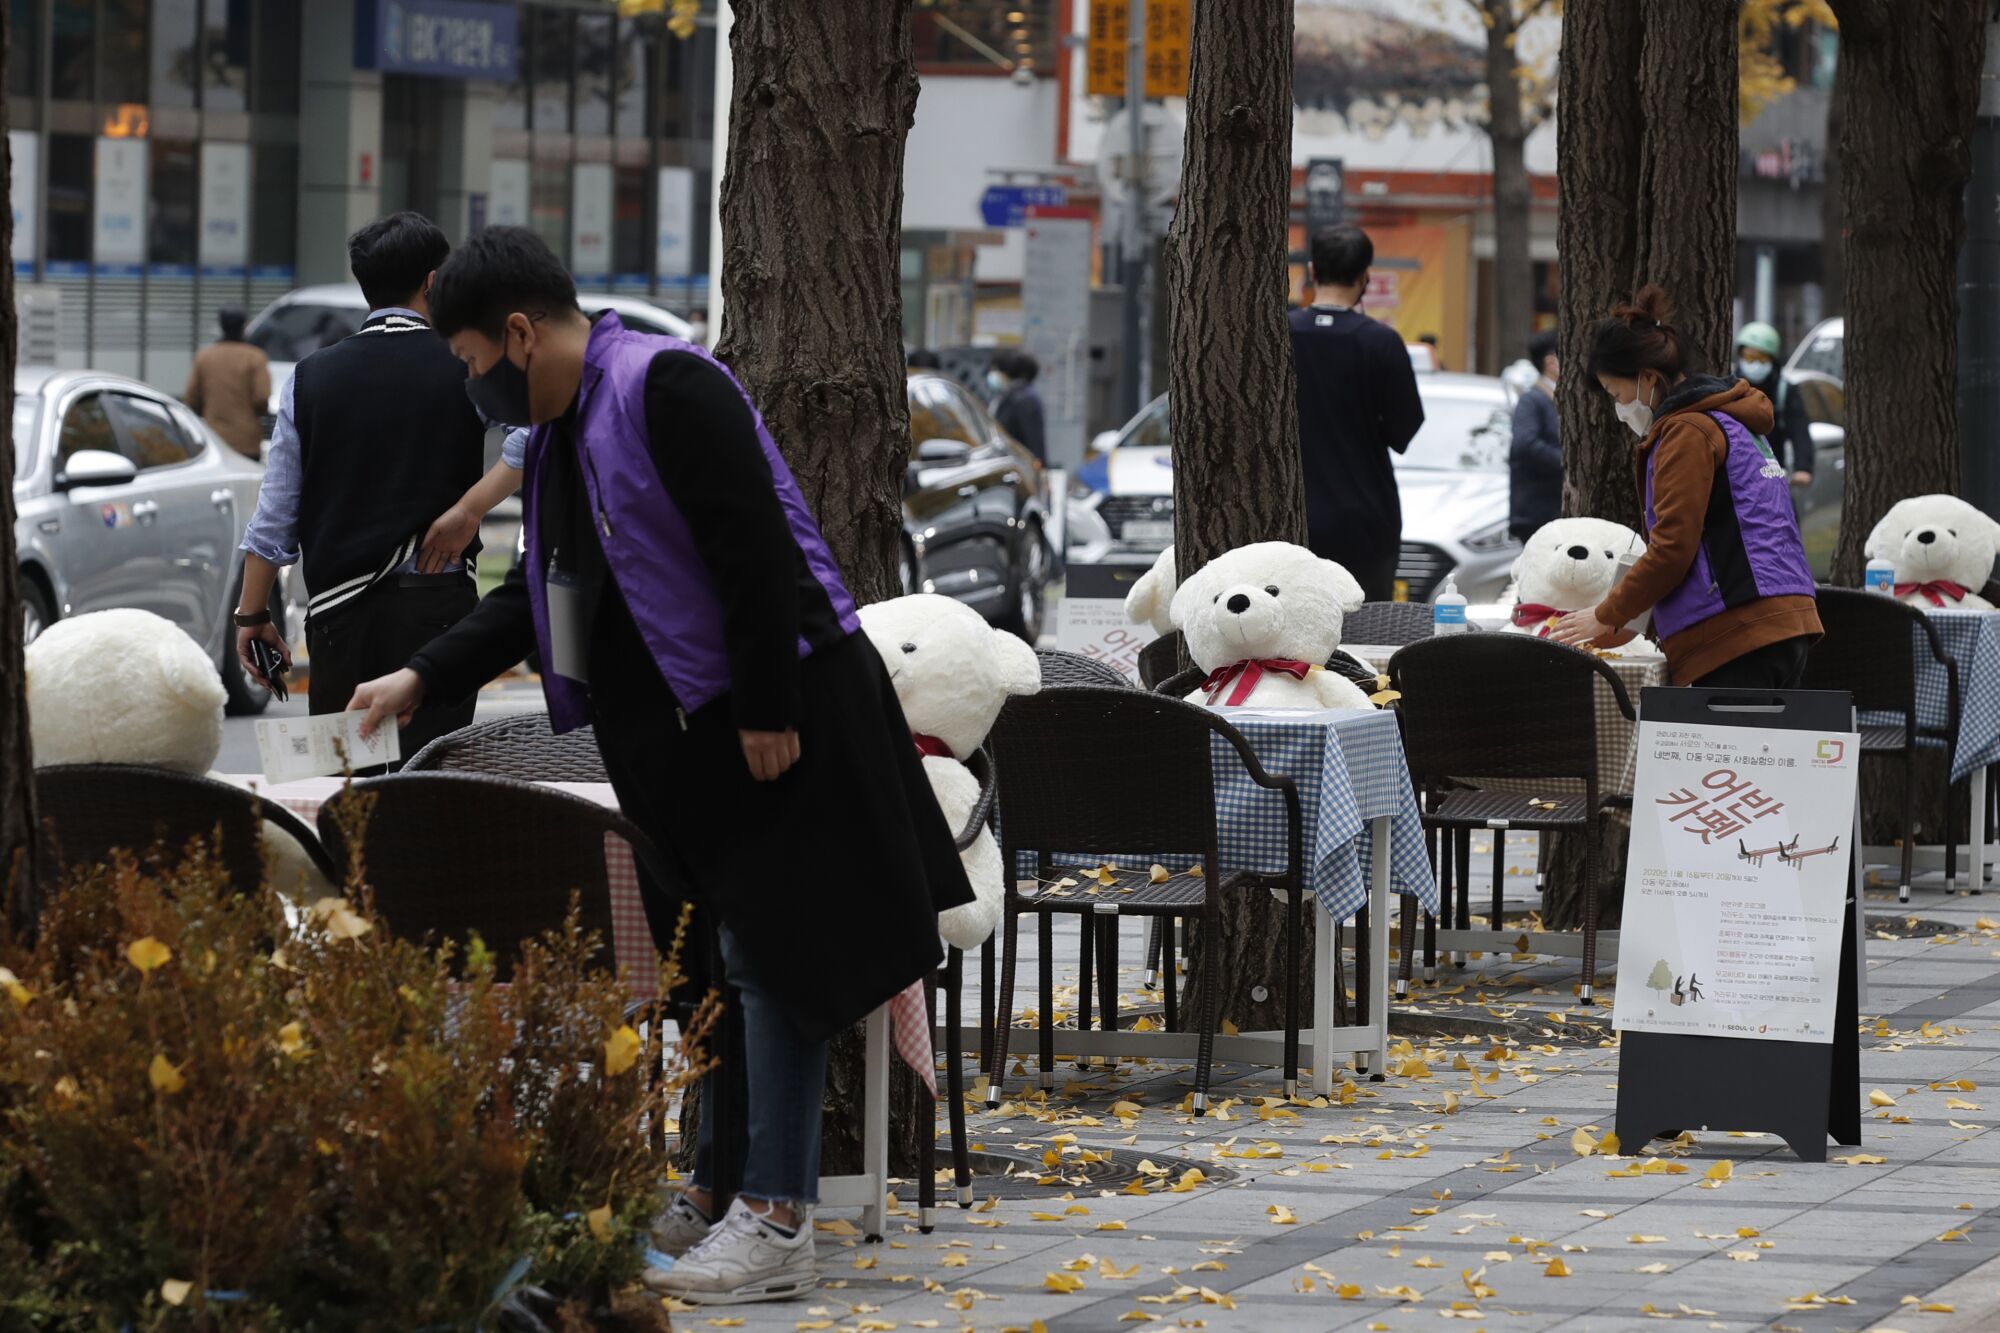 An outdoor dining set-up with hand sanitizers and stuffed bears to enforce social distancing in downtown Seoul.